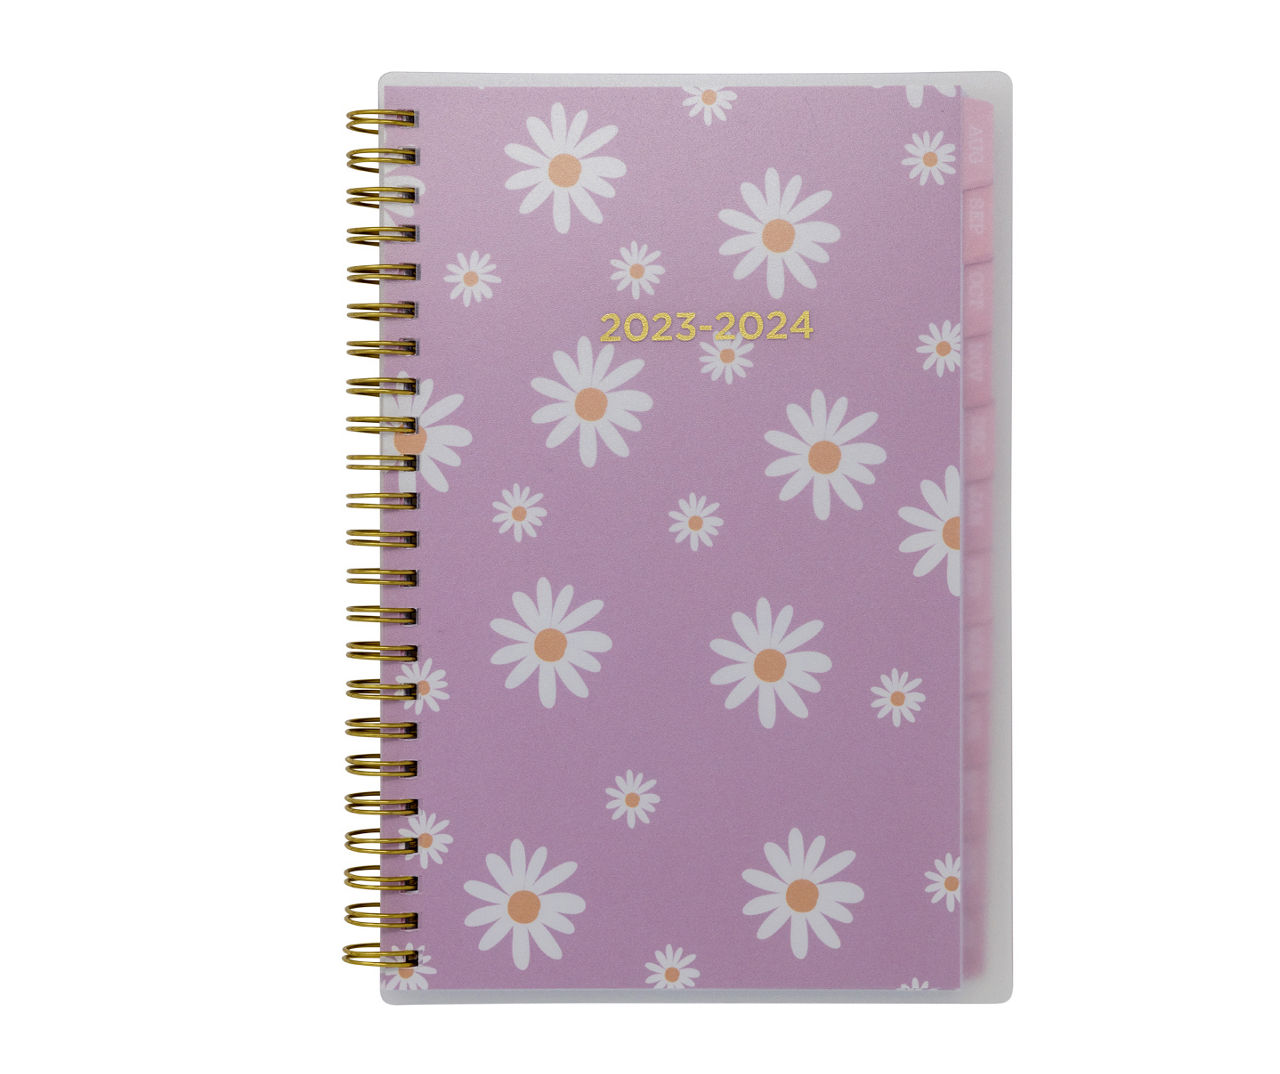 Pink Daisy Frosted Medium Monthly/Weekly 2023-2024 Spiral-Bound Planner